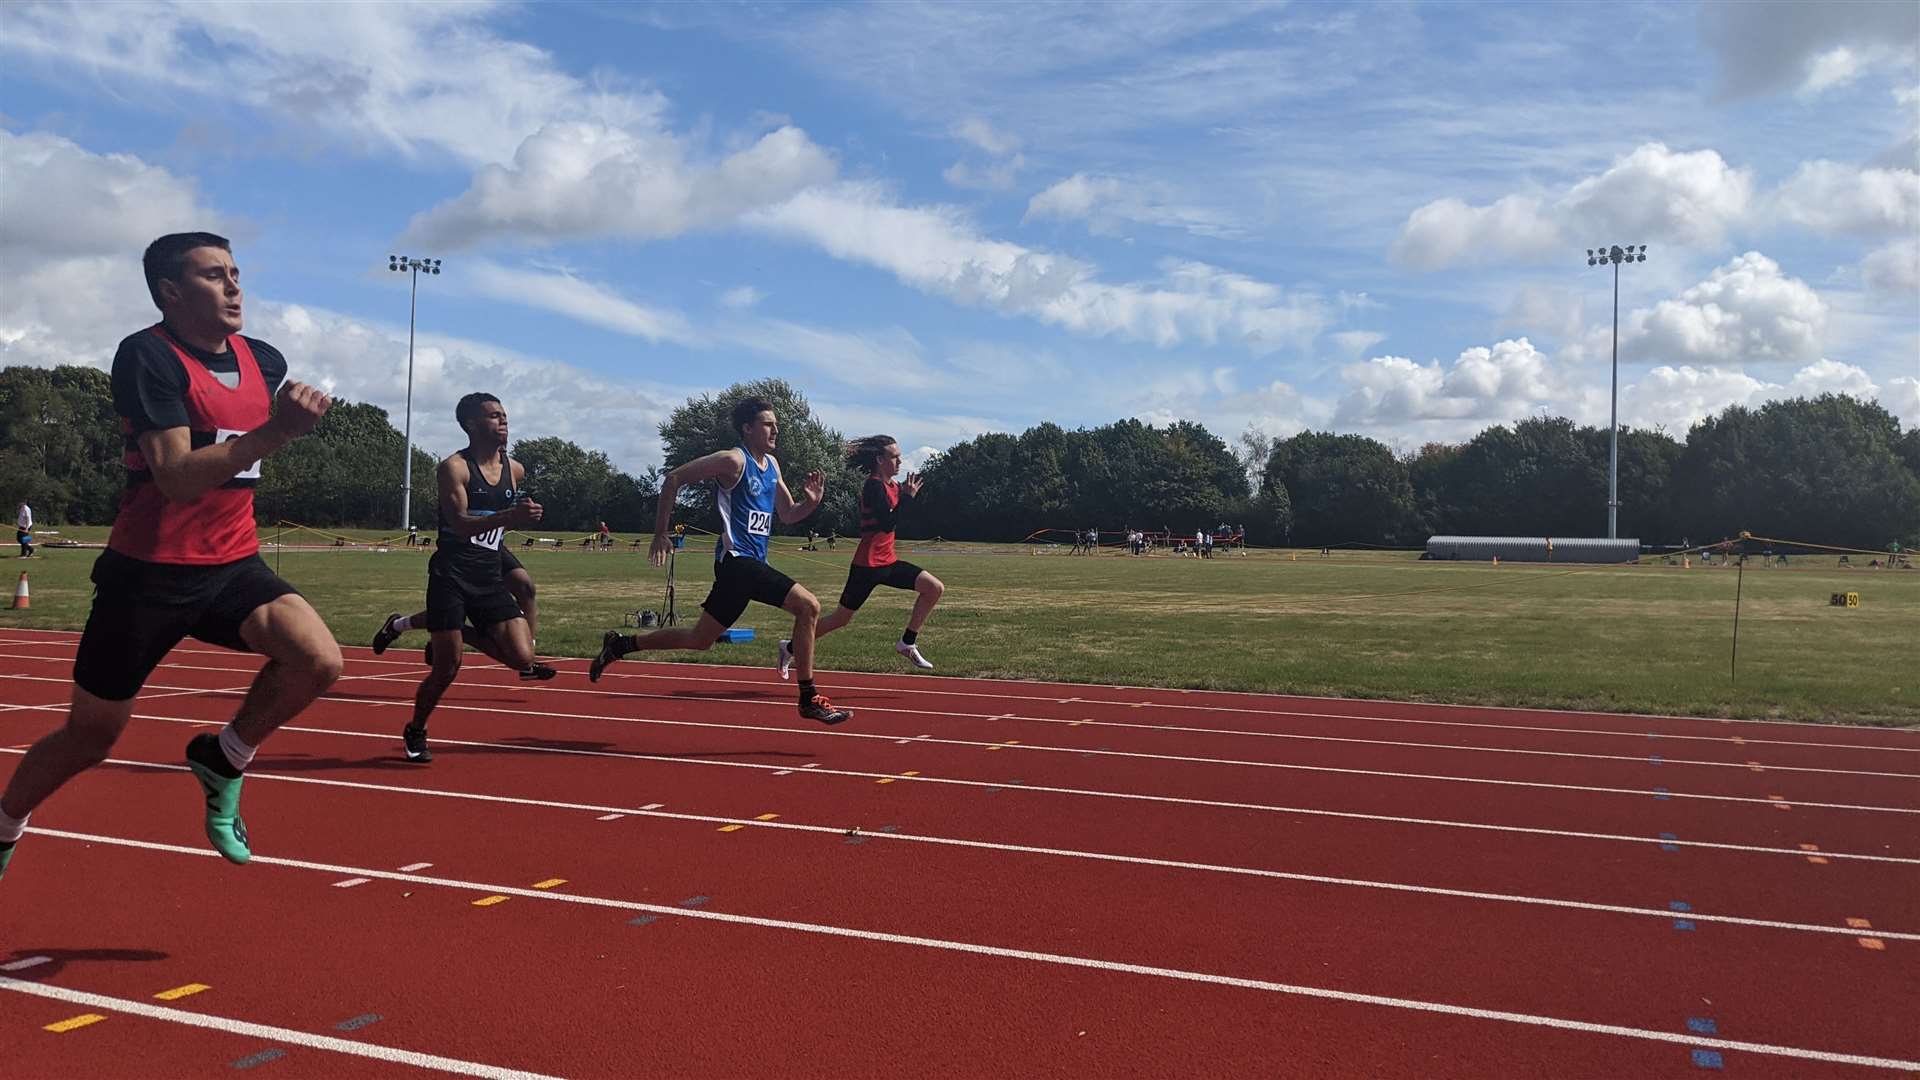 Swale Combined AC's Harrison Patching-Scott in the 100m